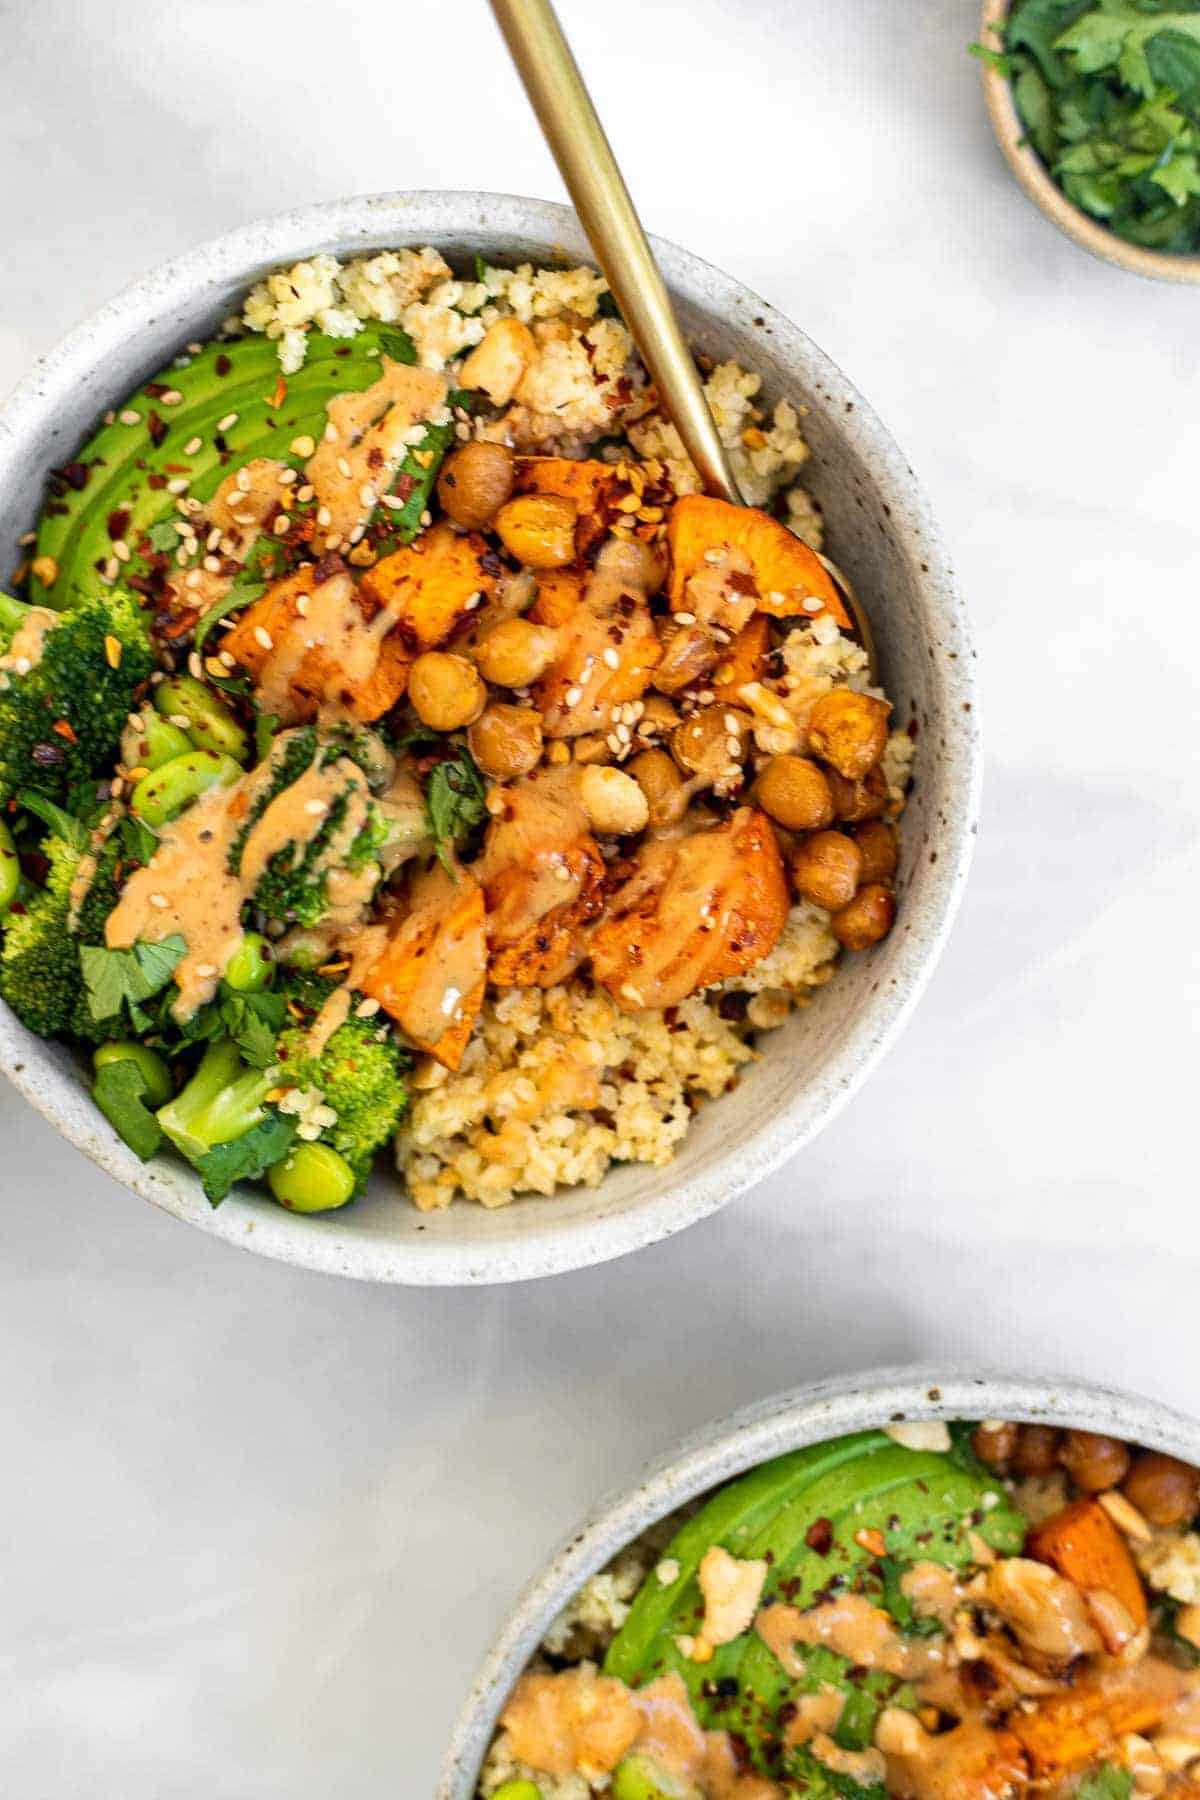 Two buddha bowls with forks on the side with millet and broccoli.